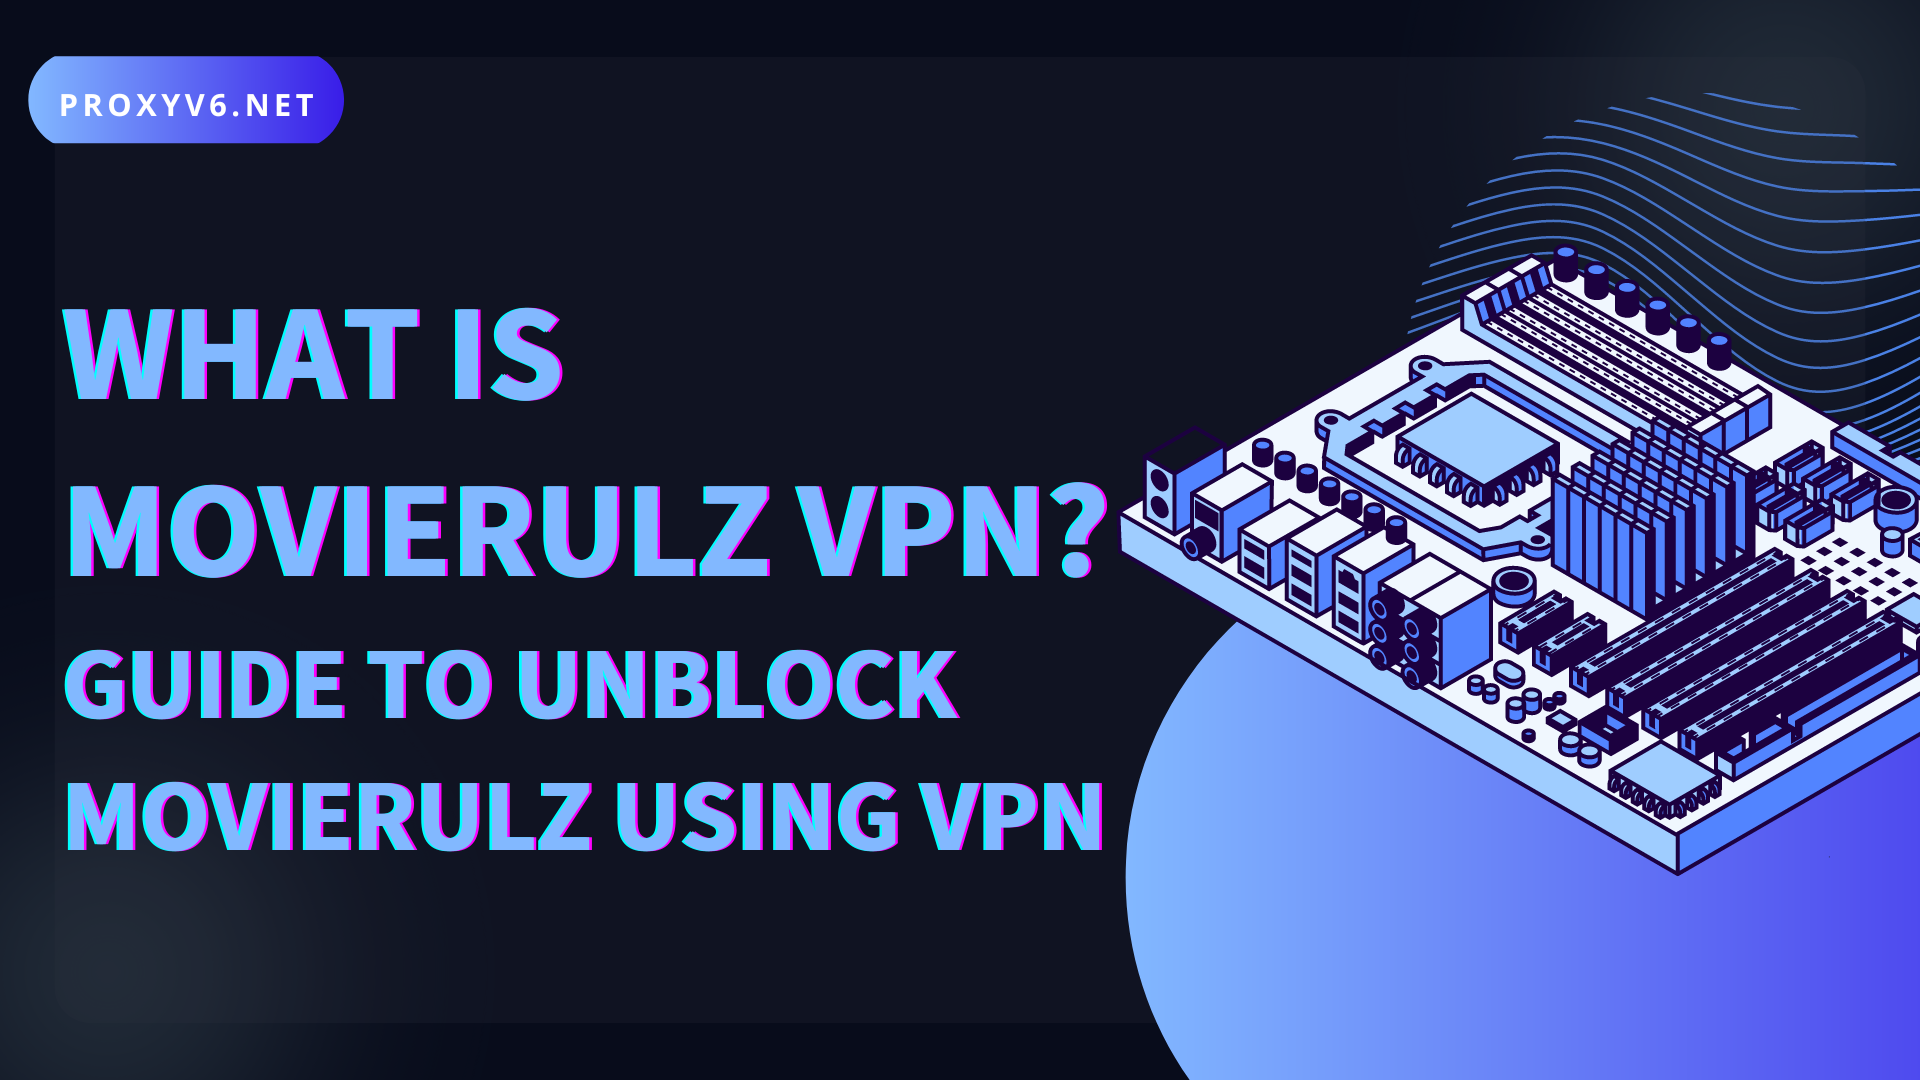 What is Movierulz VPN? Guide to unblock Movierulz using VPN